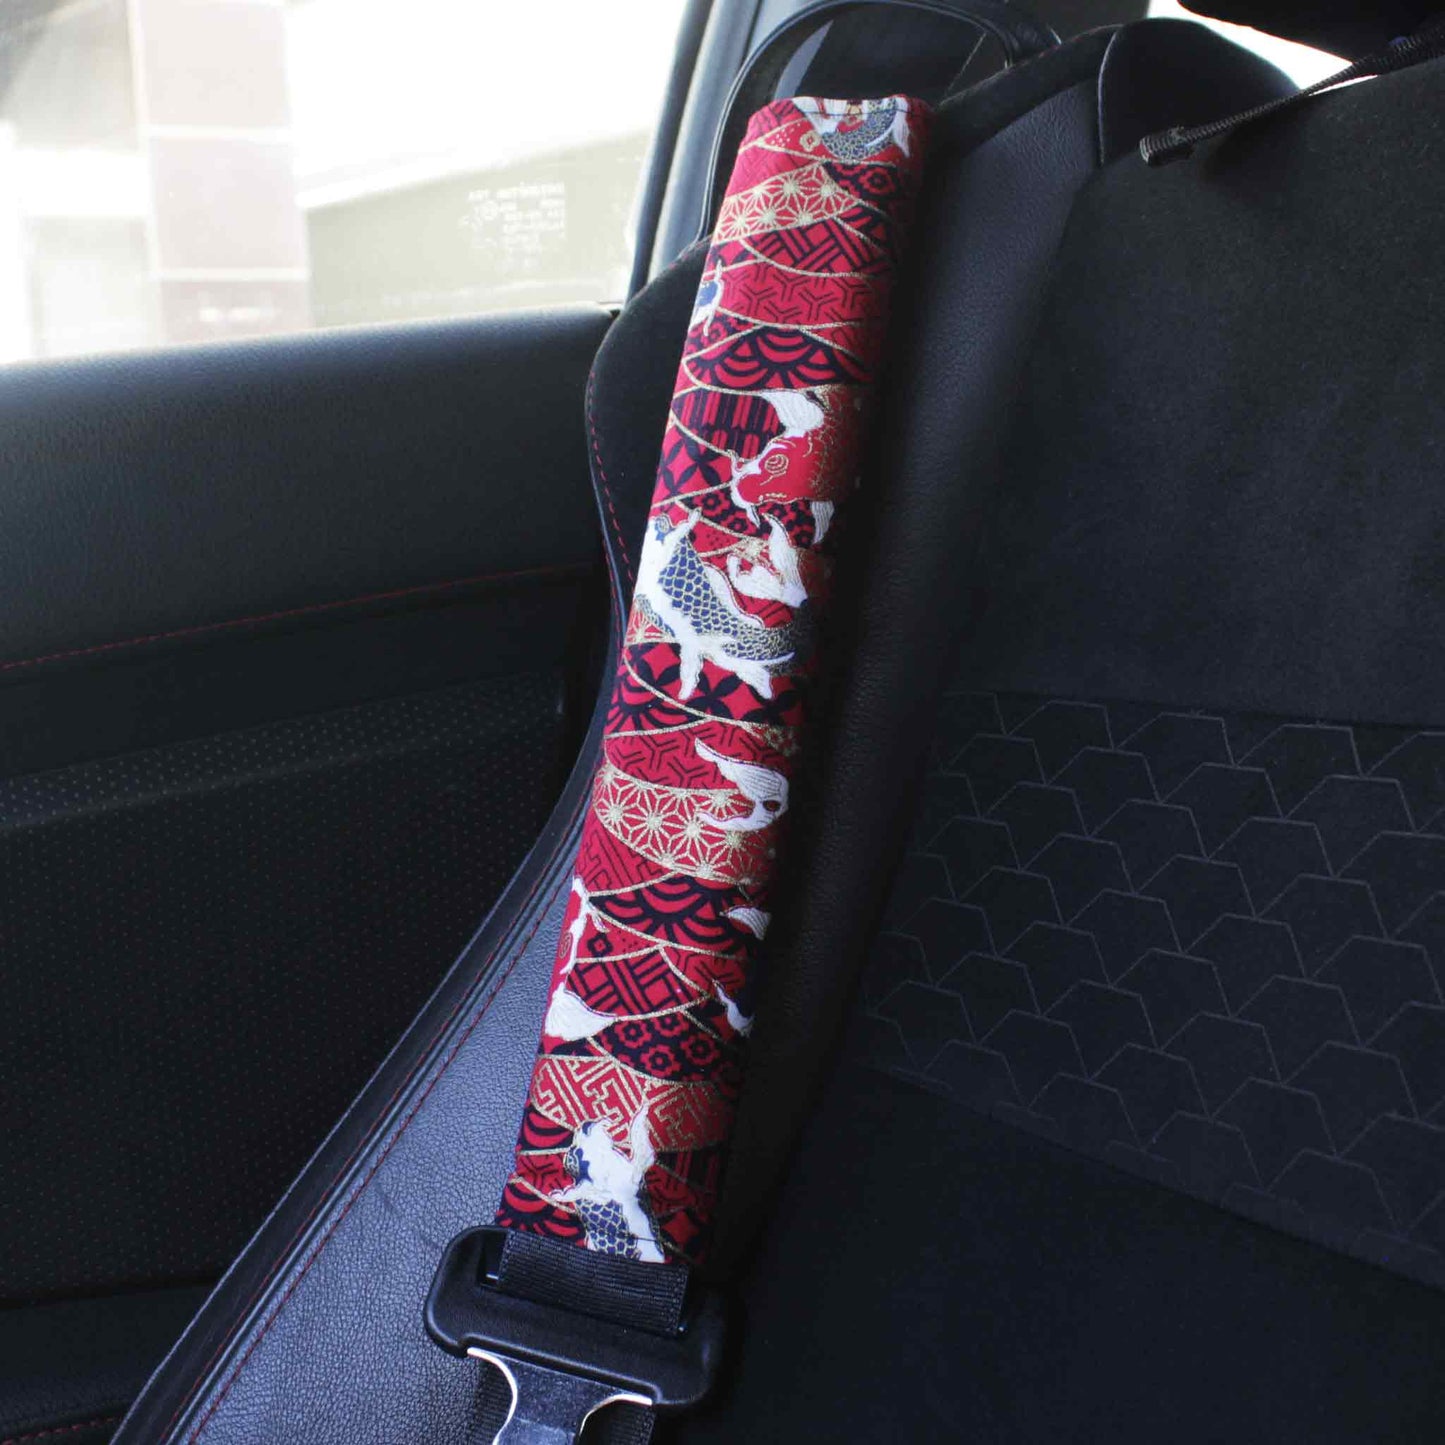 A seat belt cover with red koi fish pattern installed on a Toyota 86's seat belt